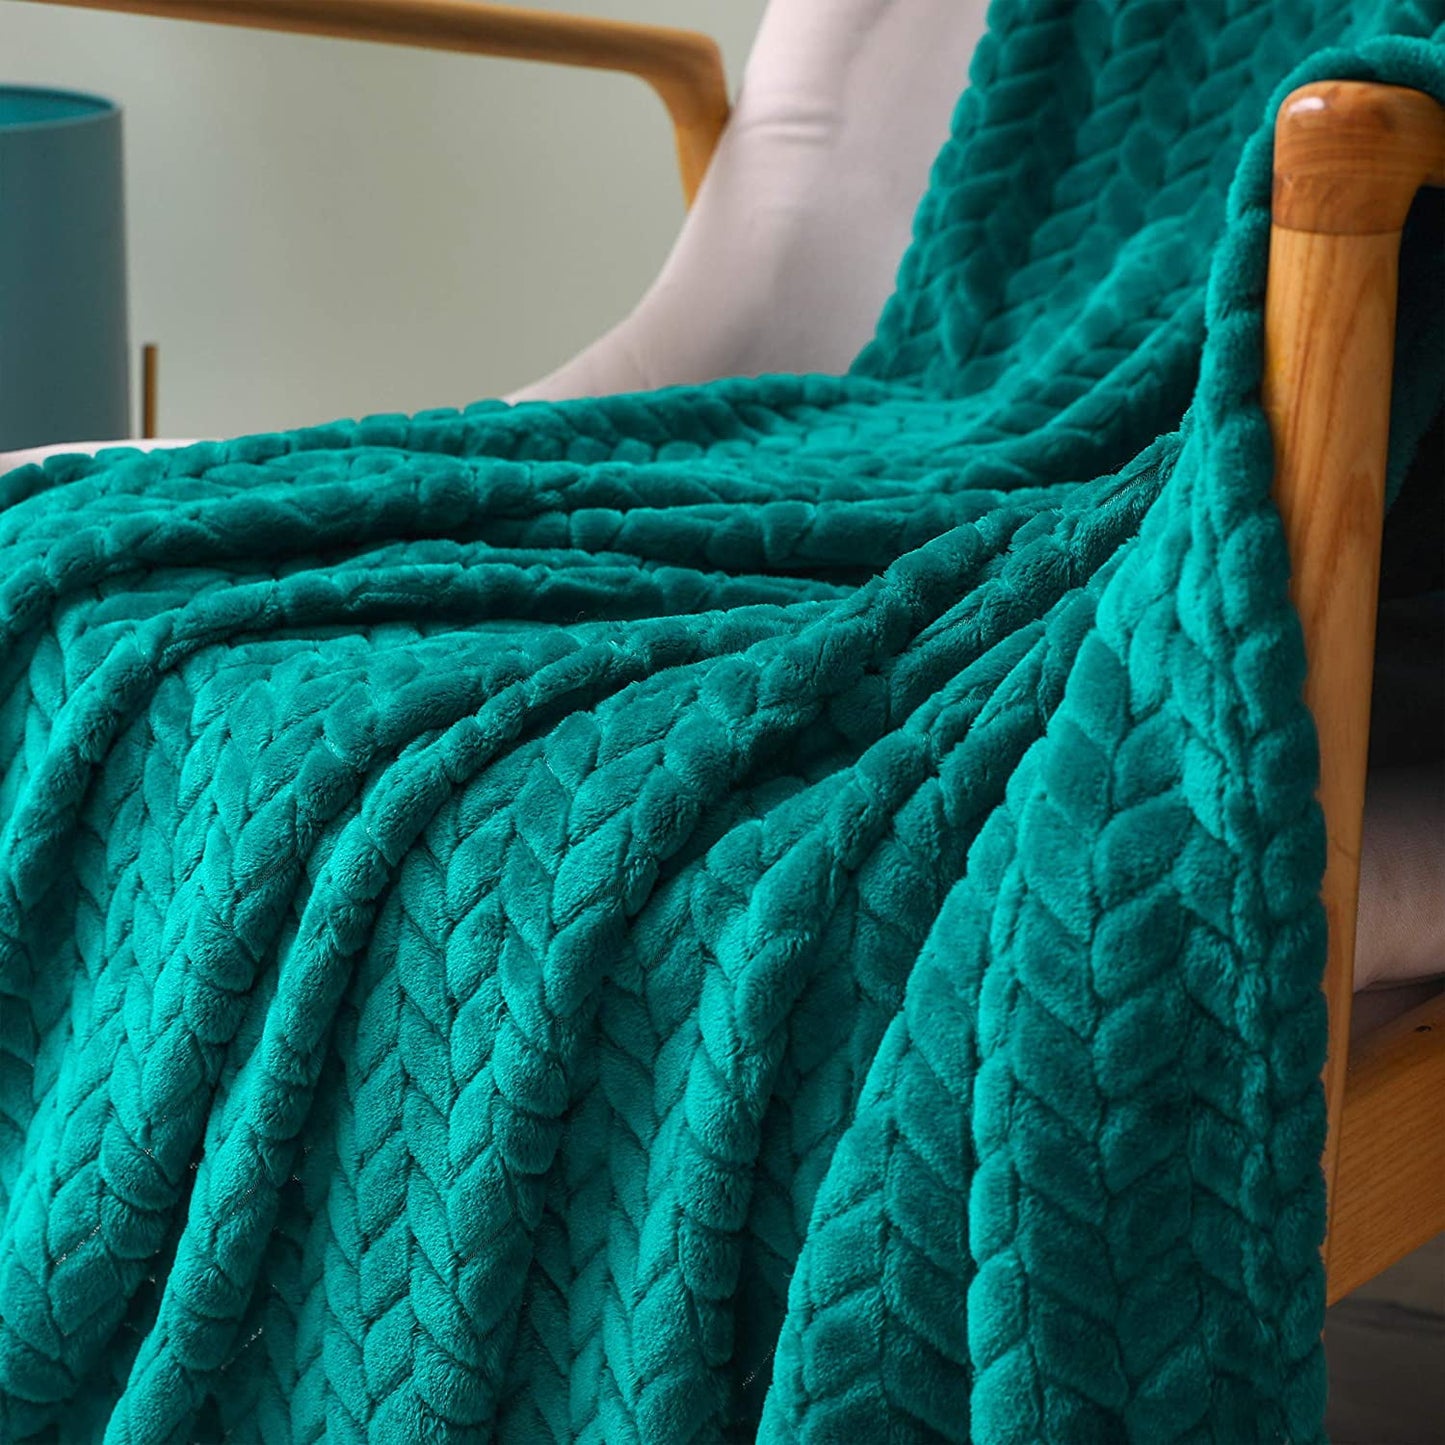 Exclusivo Mezcla Extra Large Flannel Fleece Throw Blanket, 50x70 Inches Leaves Pattern Soft Throw Blanket for Couch, Cozy, Warm, and Lightweight Blanket for Winter, Teal Blanket